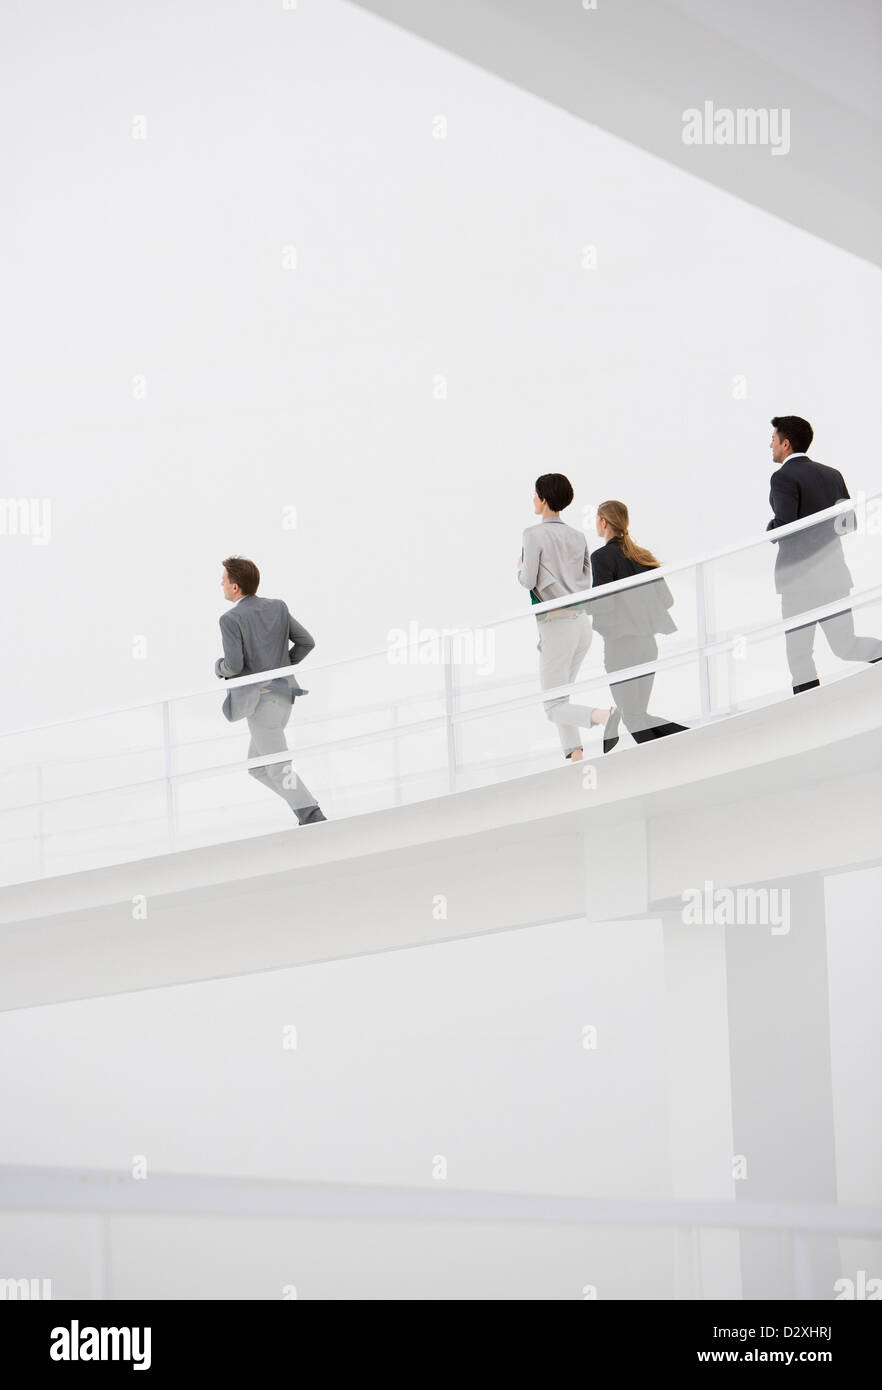 Business people running down elevated walkway Stock Photo